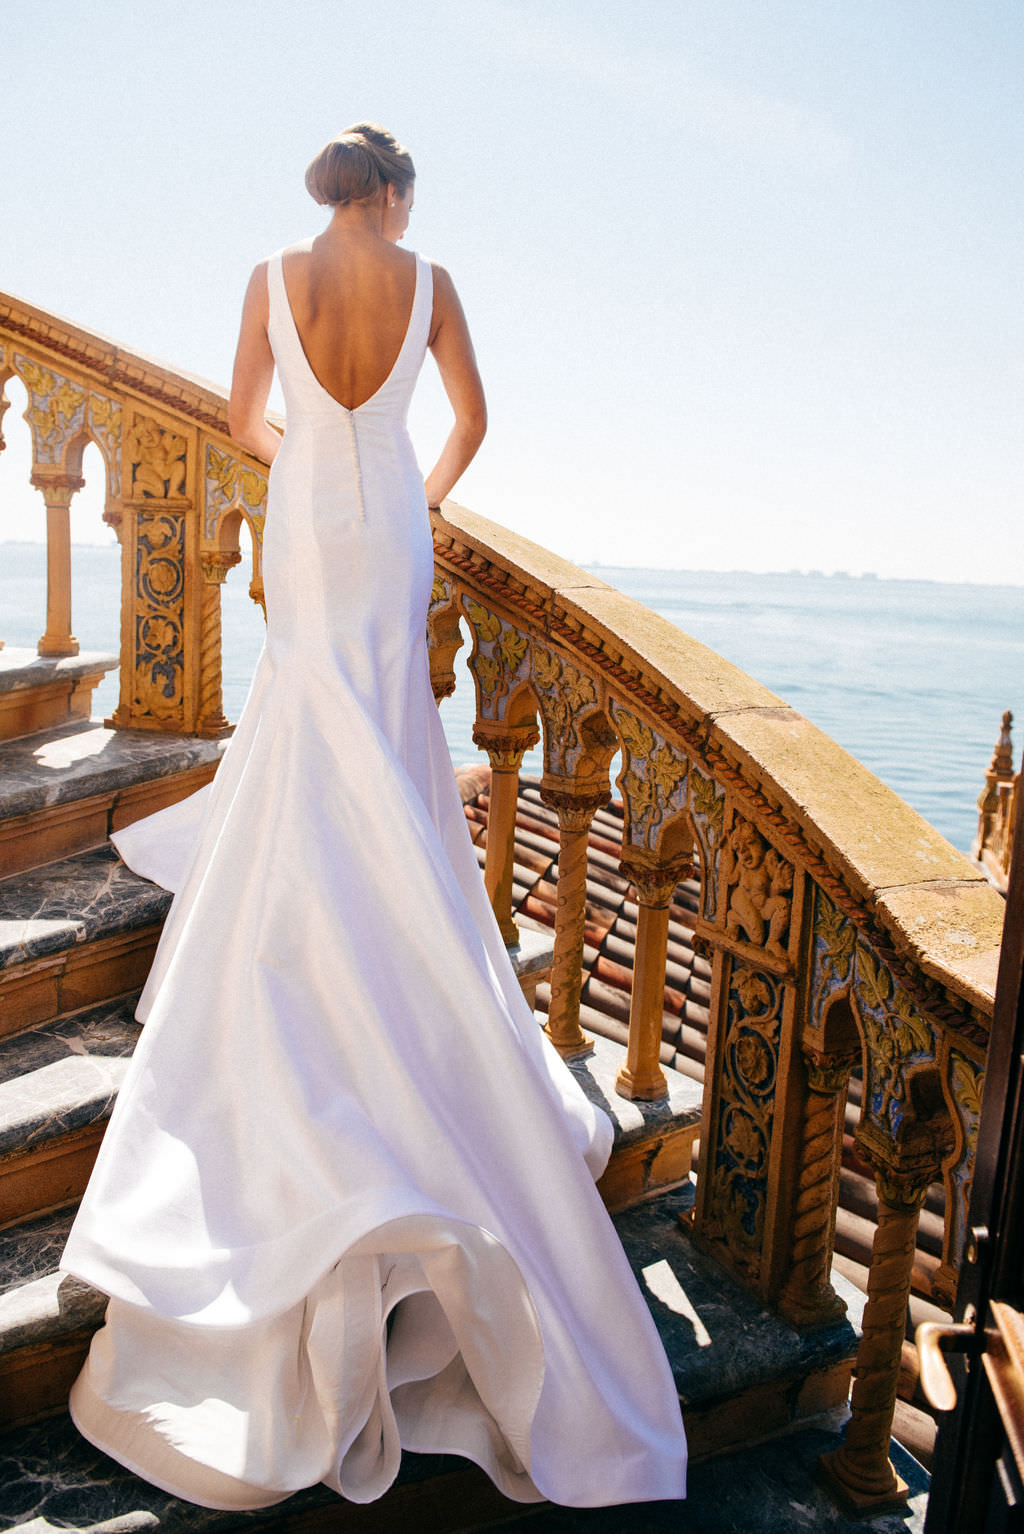 Bride in Classic Silhouette Open Back Wedding Dress on Staircase at Waterfront Sarasota Wedding Venue Ca d’Zan at The Ringling Museum | Tampa Bay Wedding Hair and Makeup Femme Akoi Beauty Studio